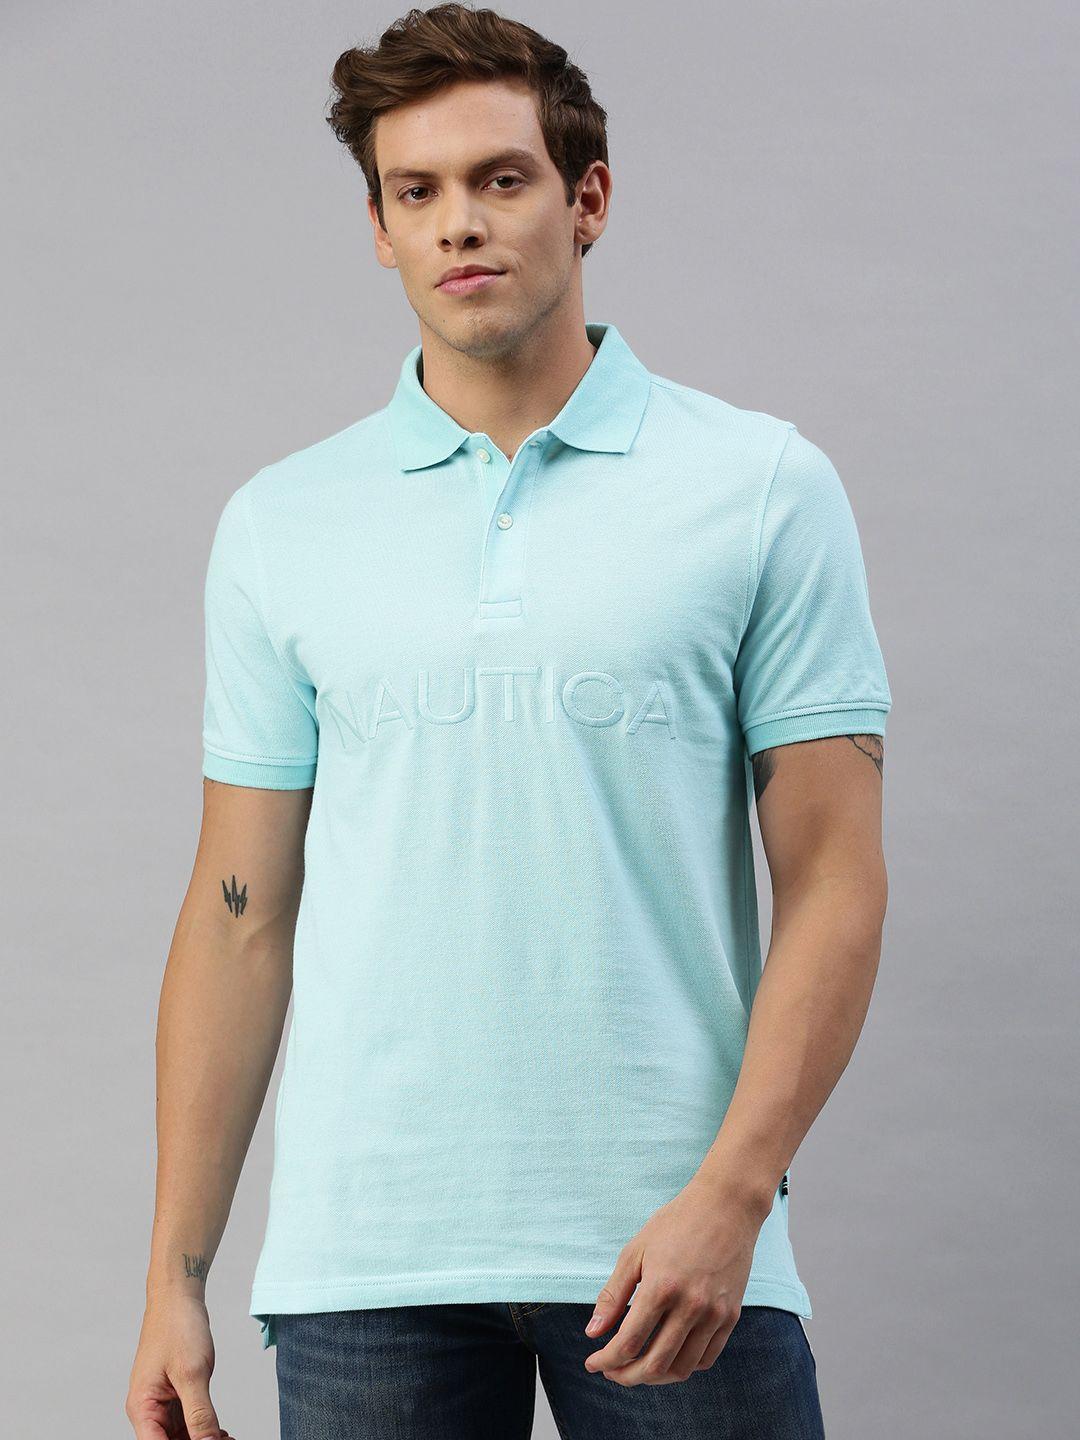 nautica men turquoise blue embroidered polo collar t-shirt